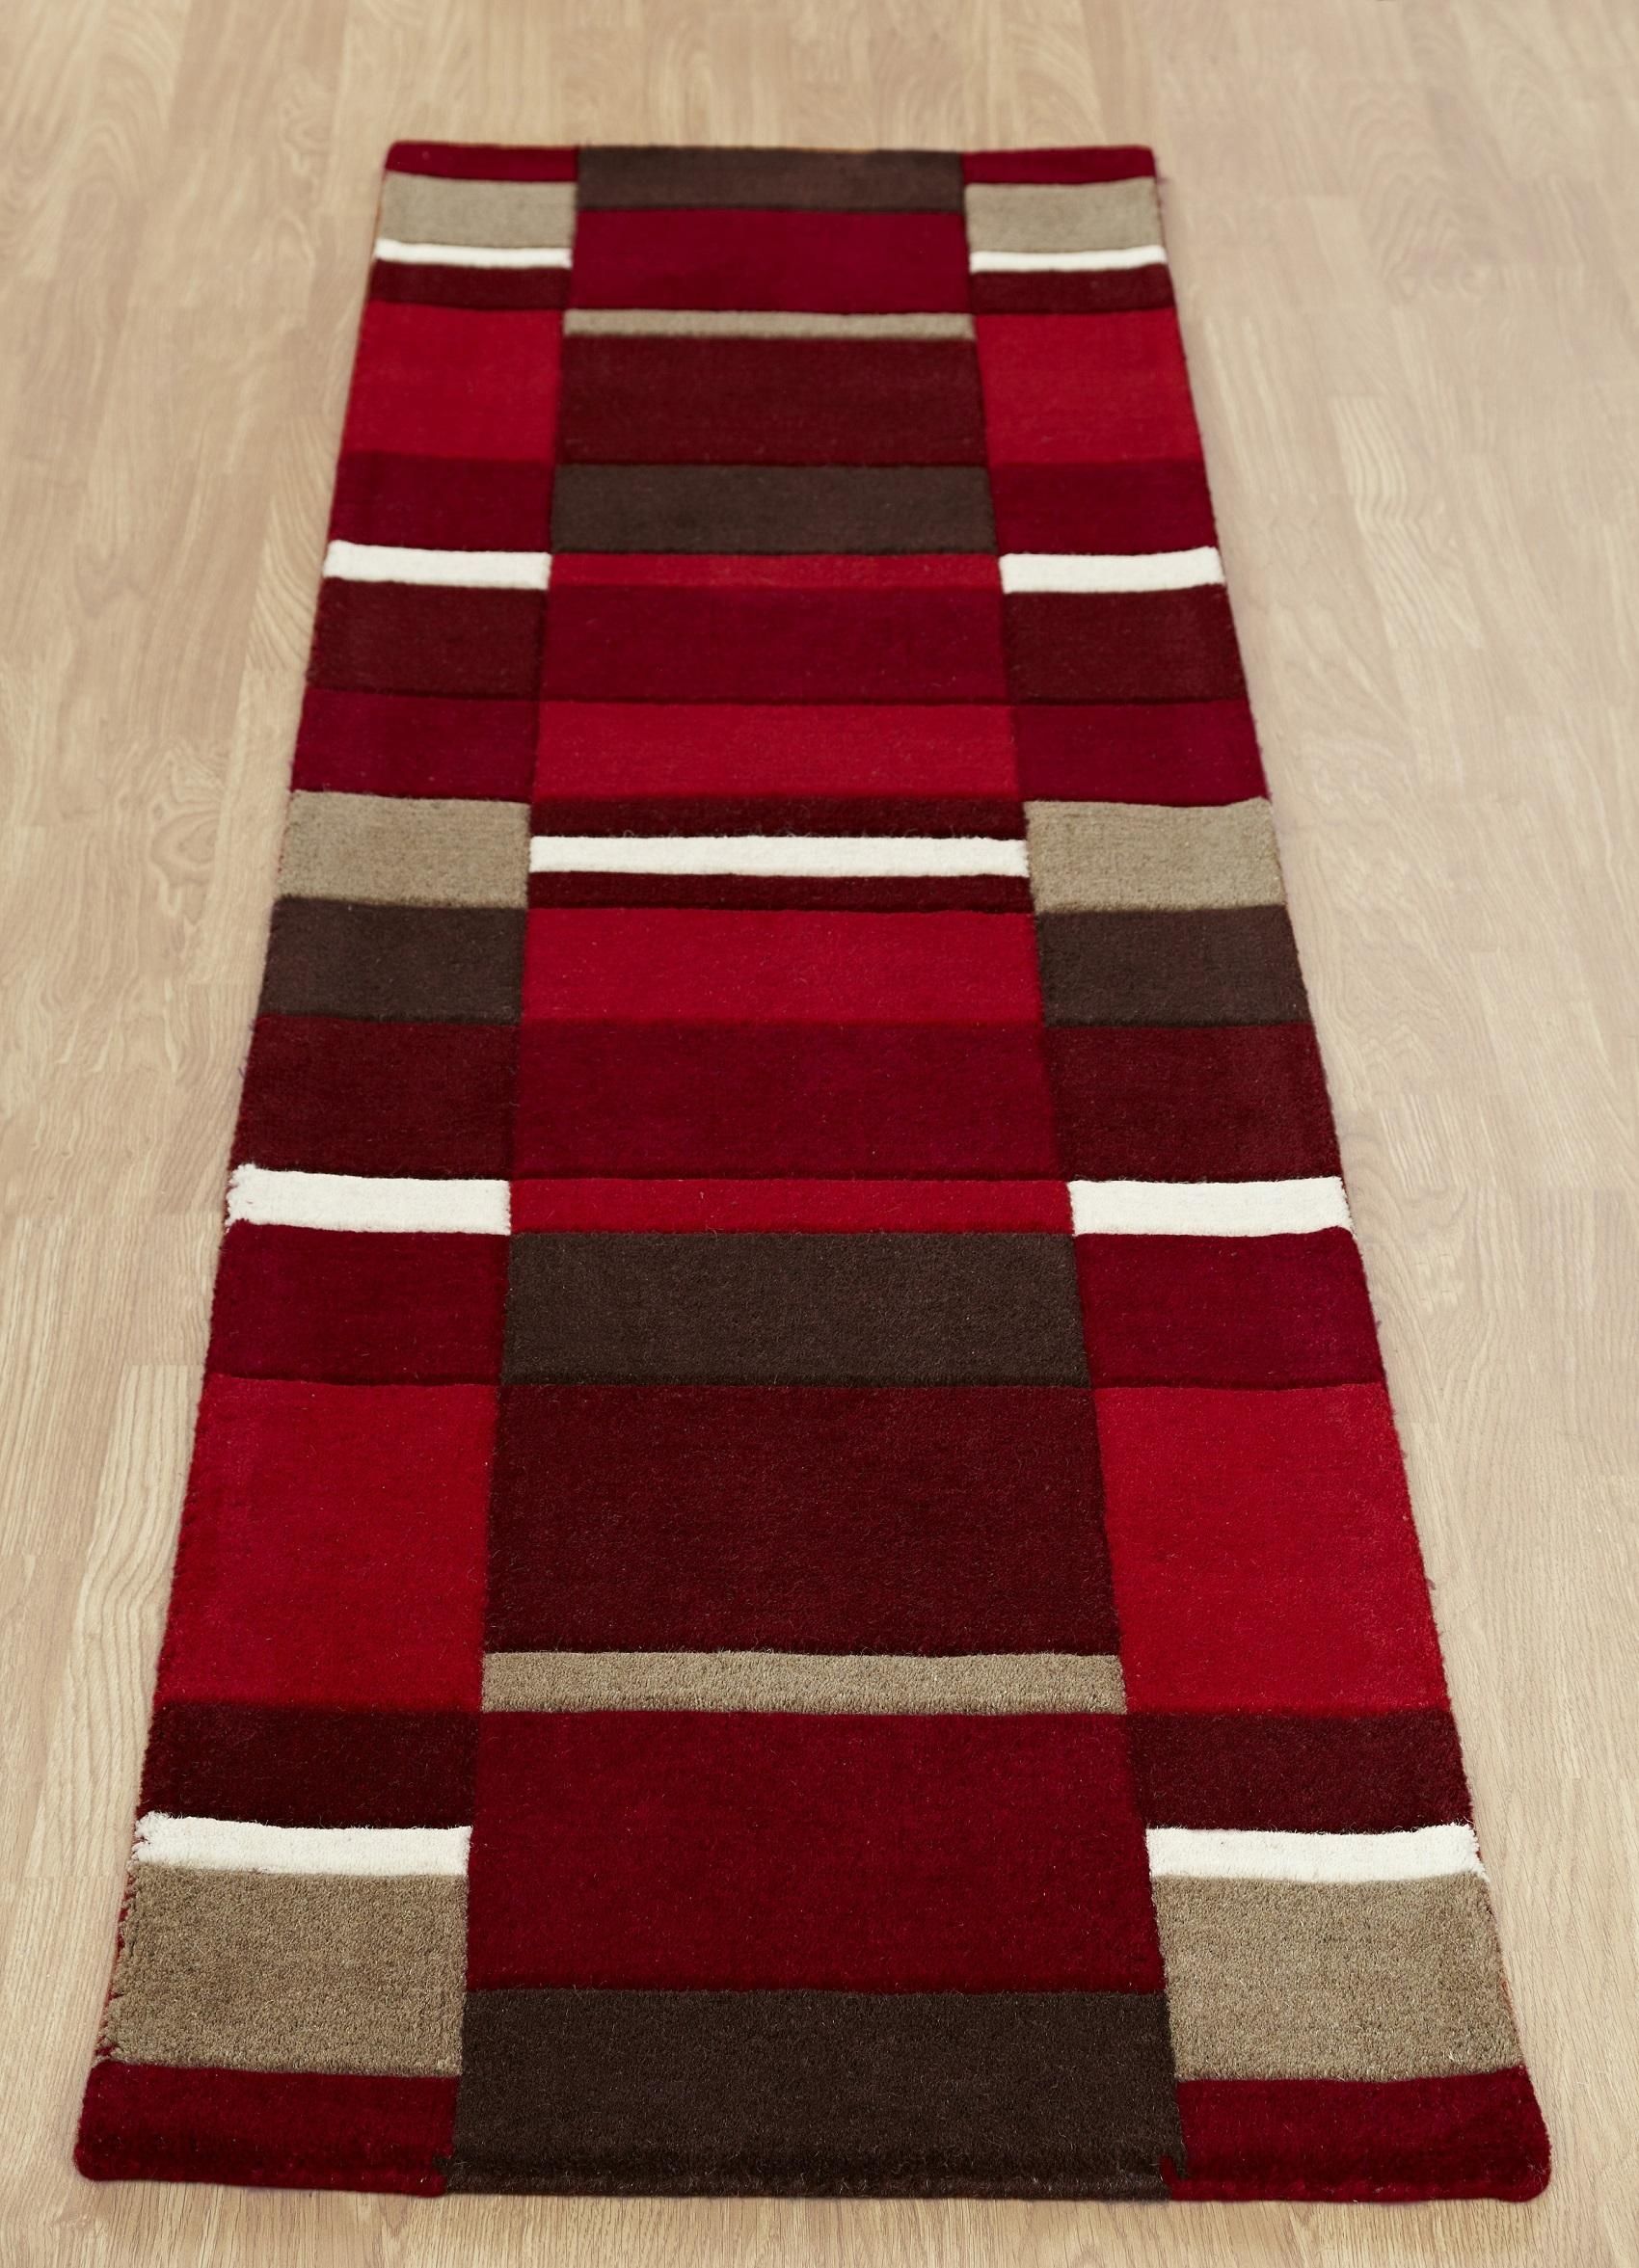 Under The Rug Rugs Ideas Creative Rugs Decoration Throughout Hallway Runners Rugs (View 11 of 20)